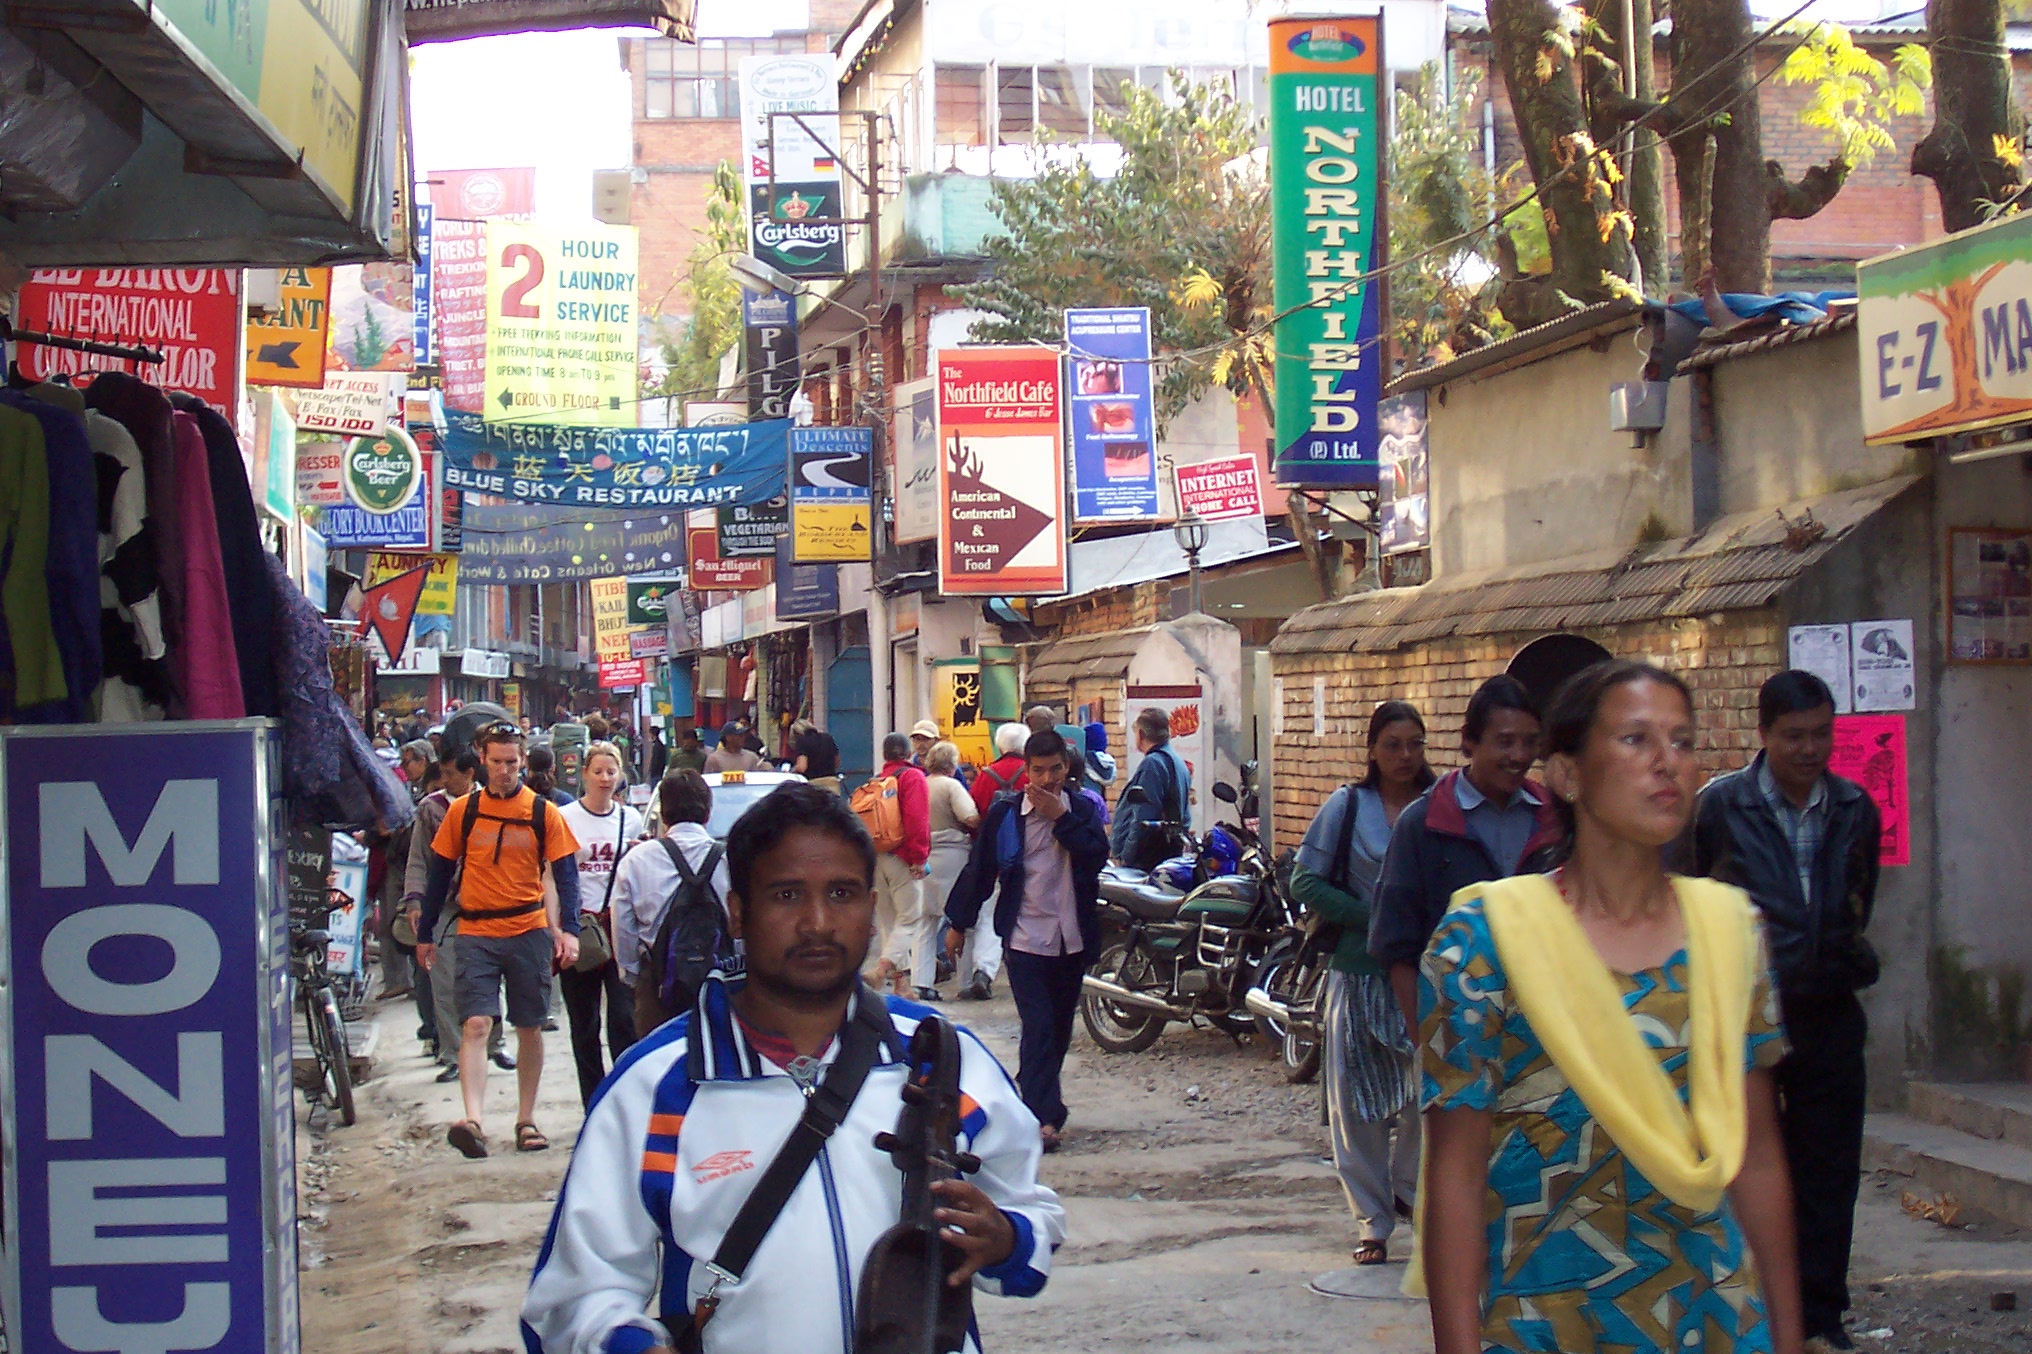 nature characters humanoids annet nepal streetscape cityscape tourist tourists musician people walking streets street market advertisement taxi crowd crowded shopping shoppingstreet